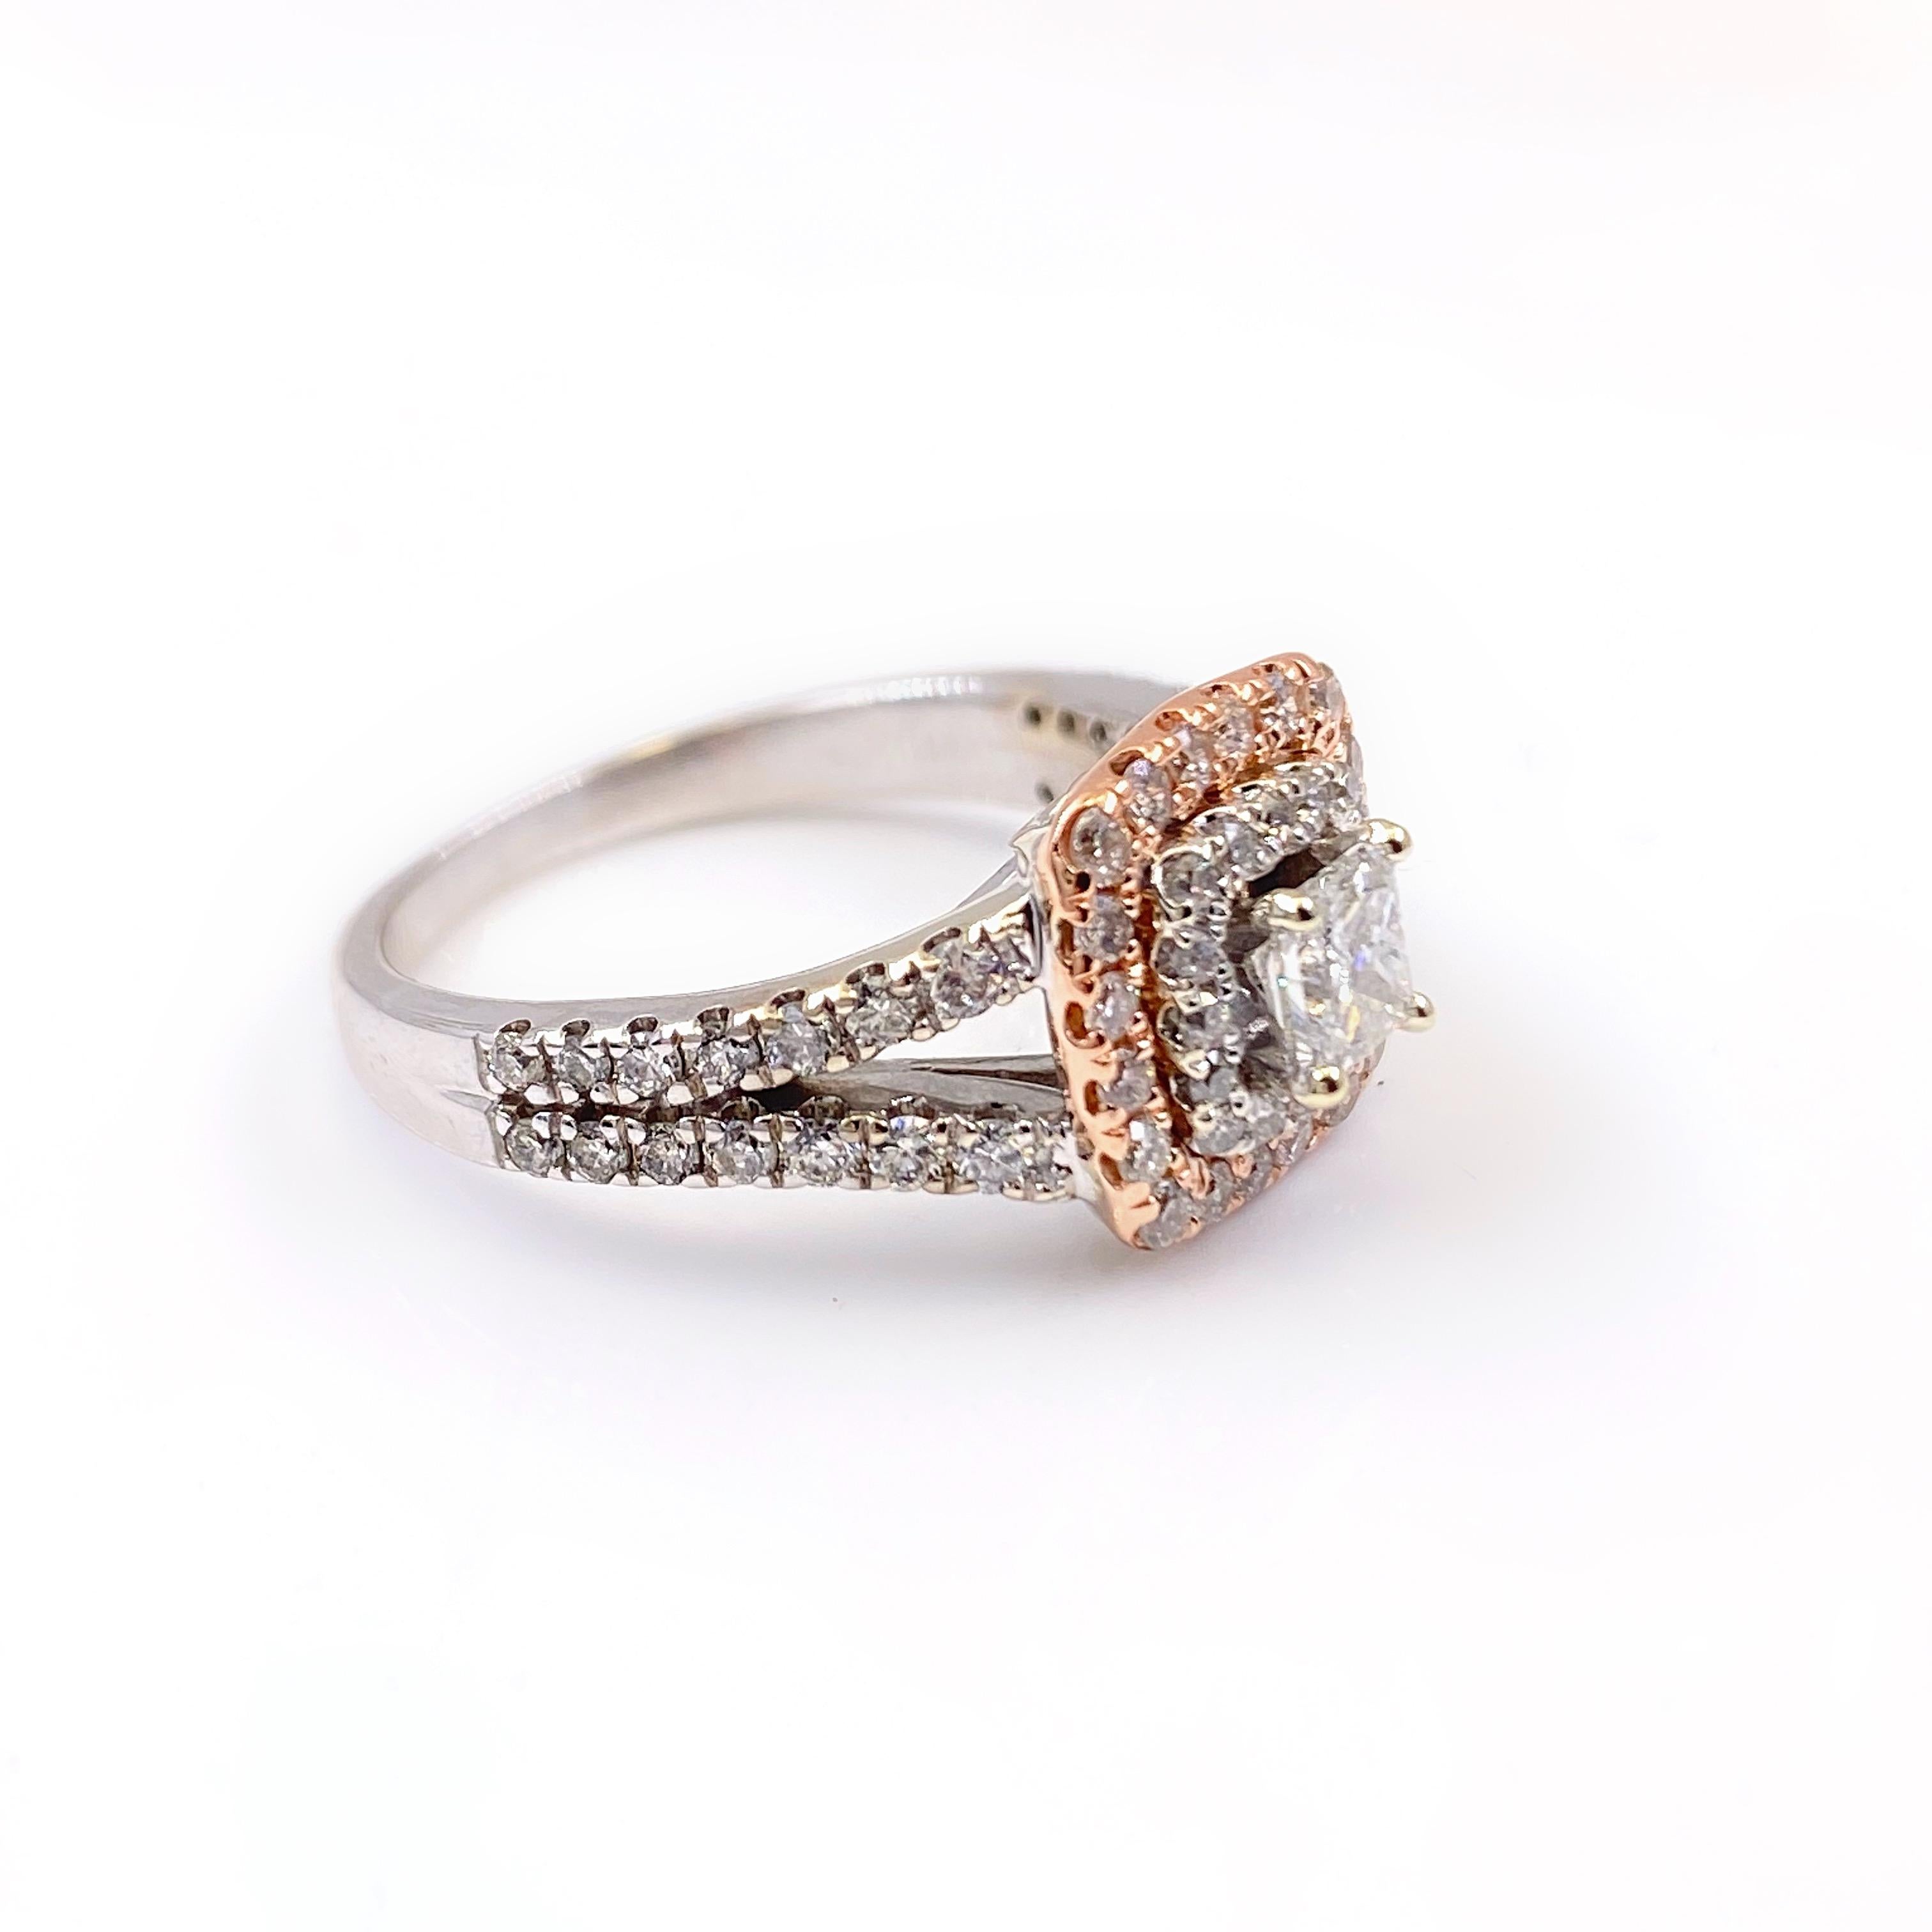 Princess Diamond Double Halo 1.00 Carat Ring 14 Karat White and Rose Gold In Excellent Condition For Sale In San Diego, CA